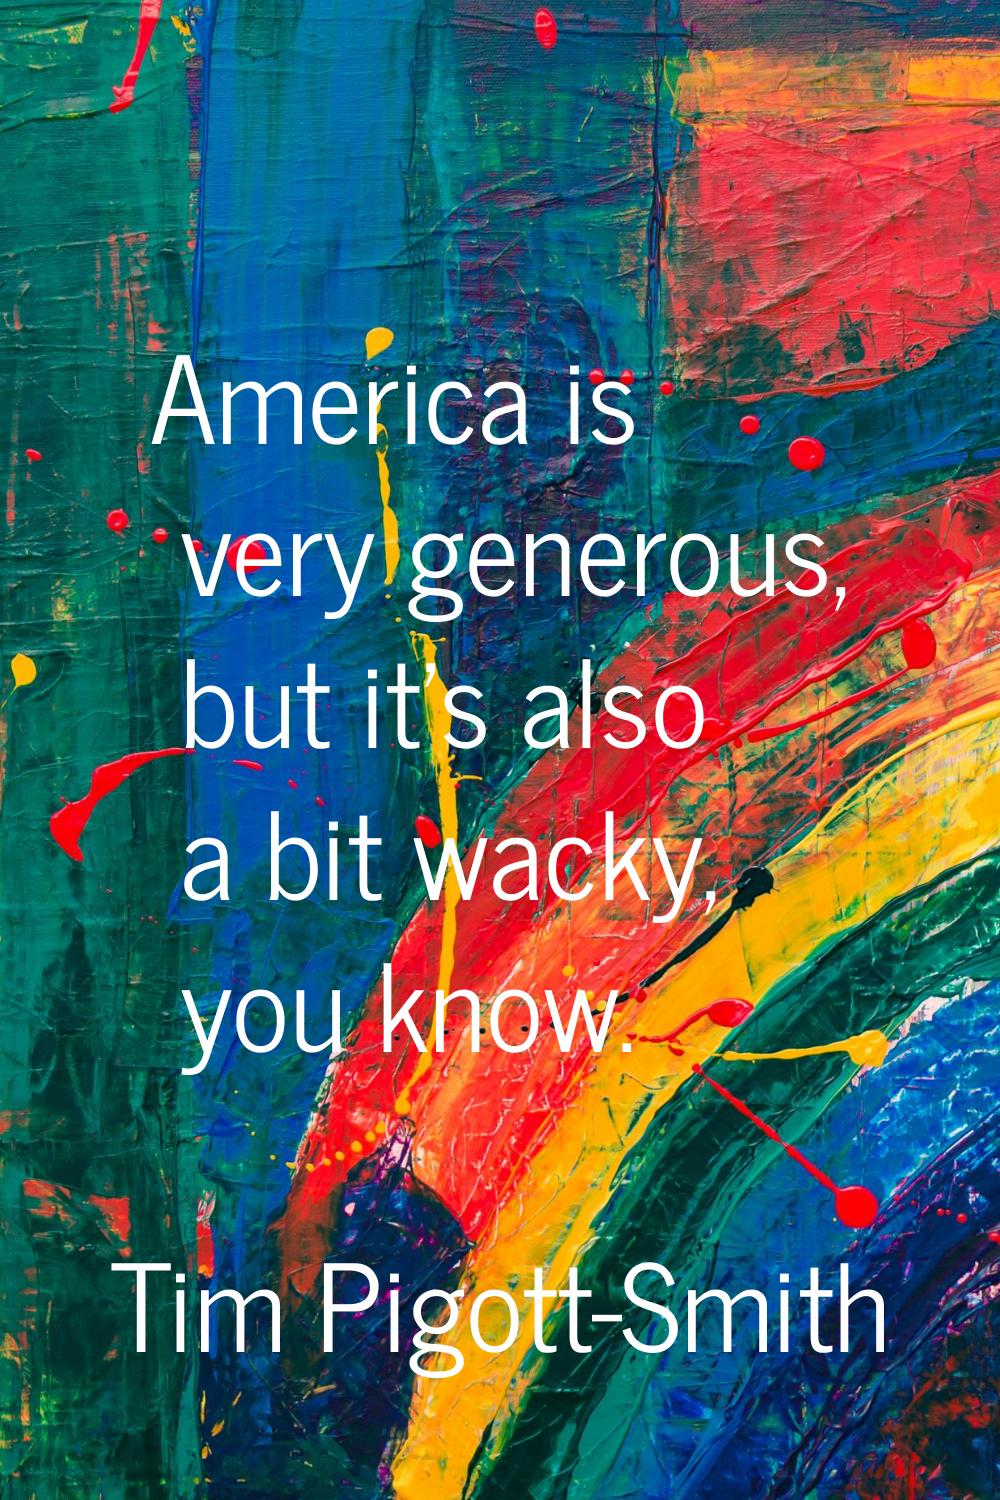 America is very generous, but it's also a bit wacky, you know.